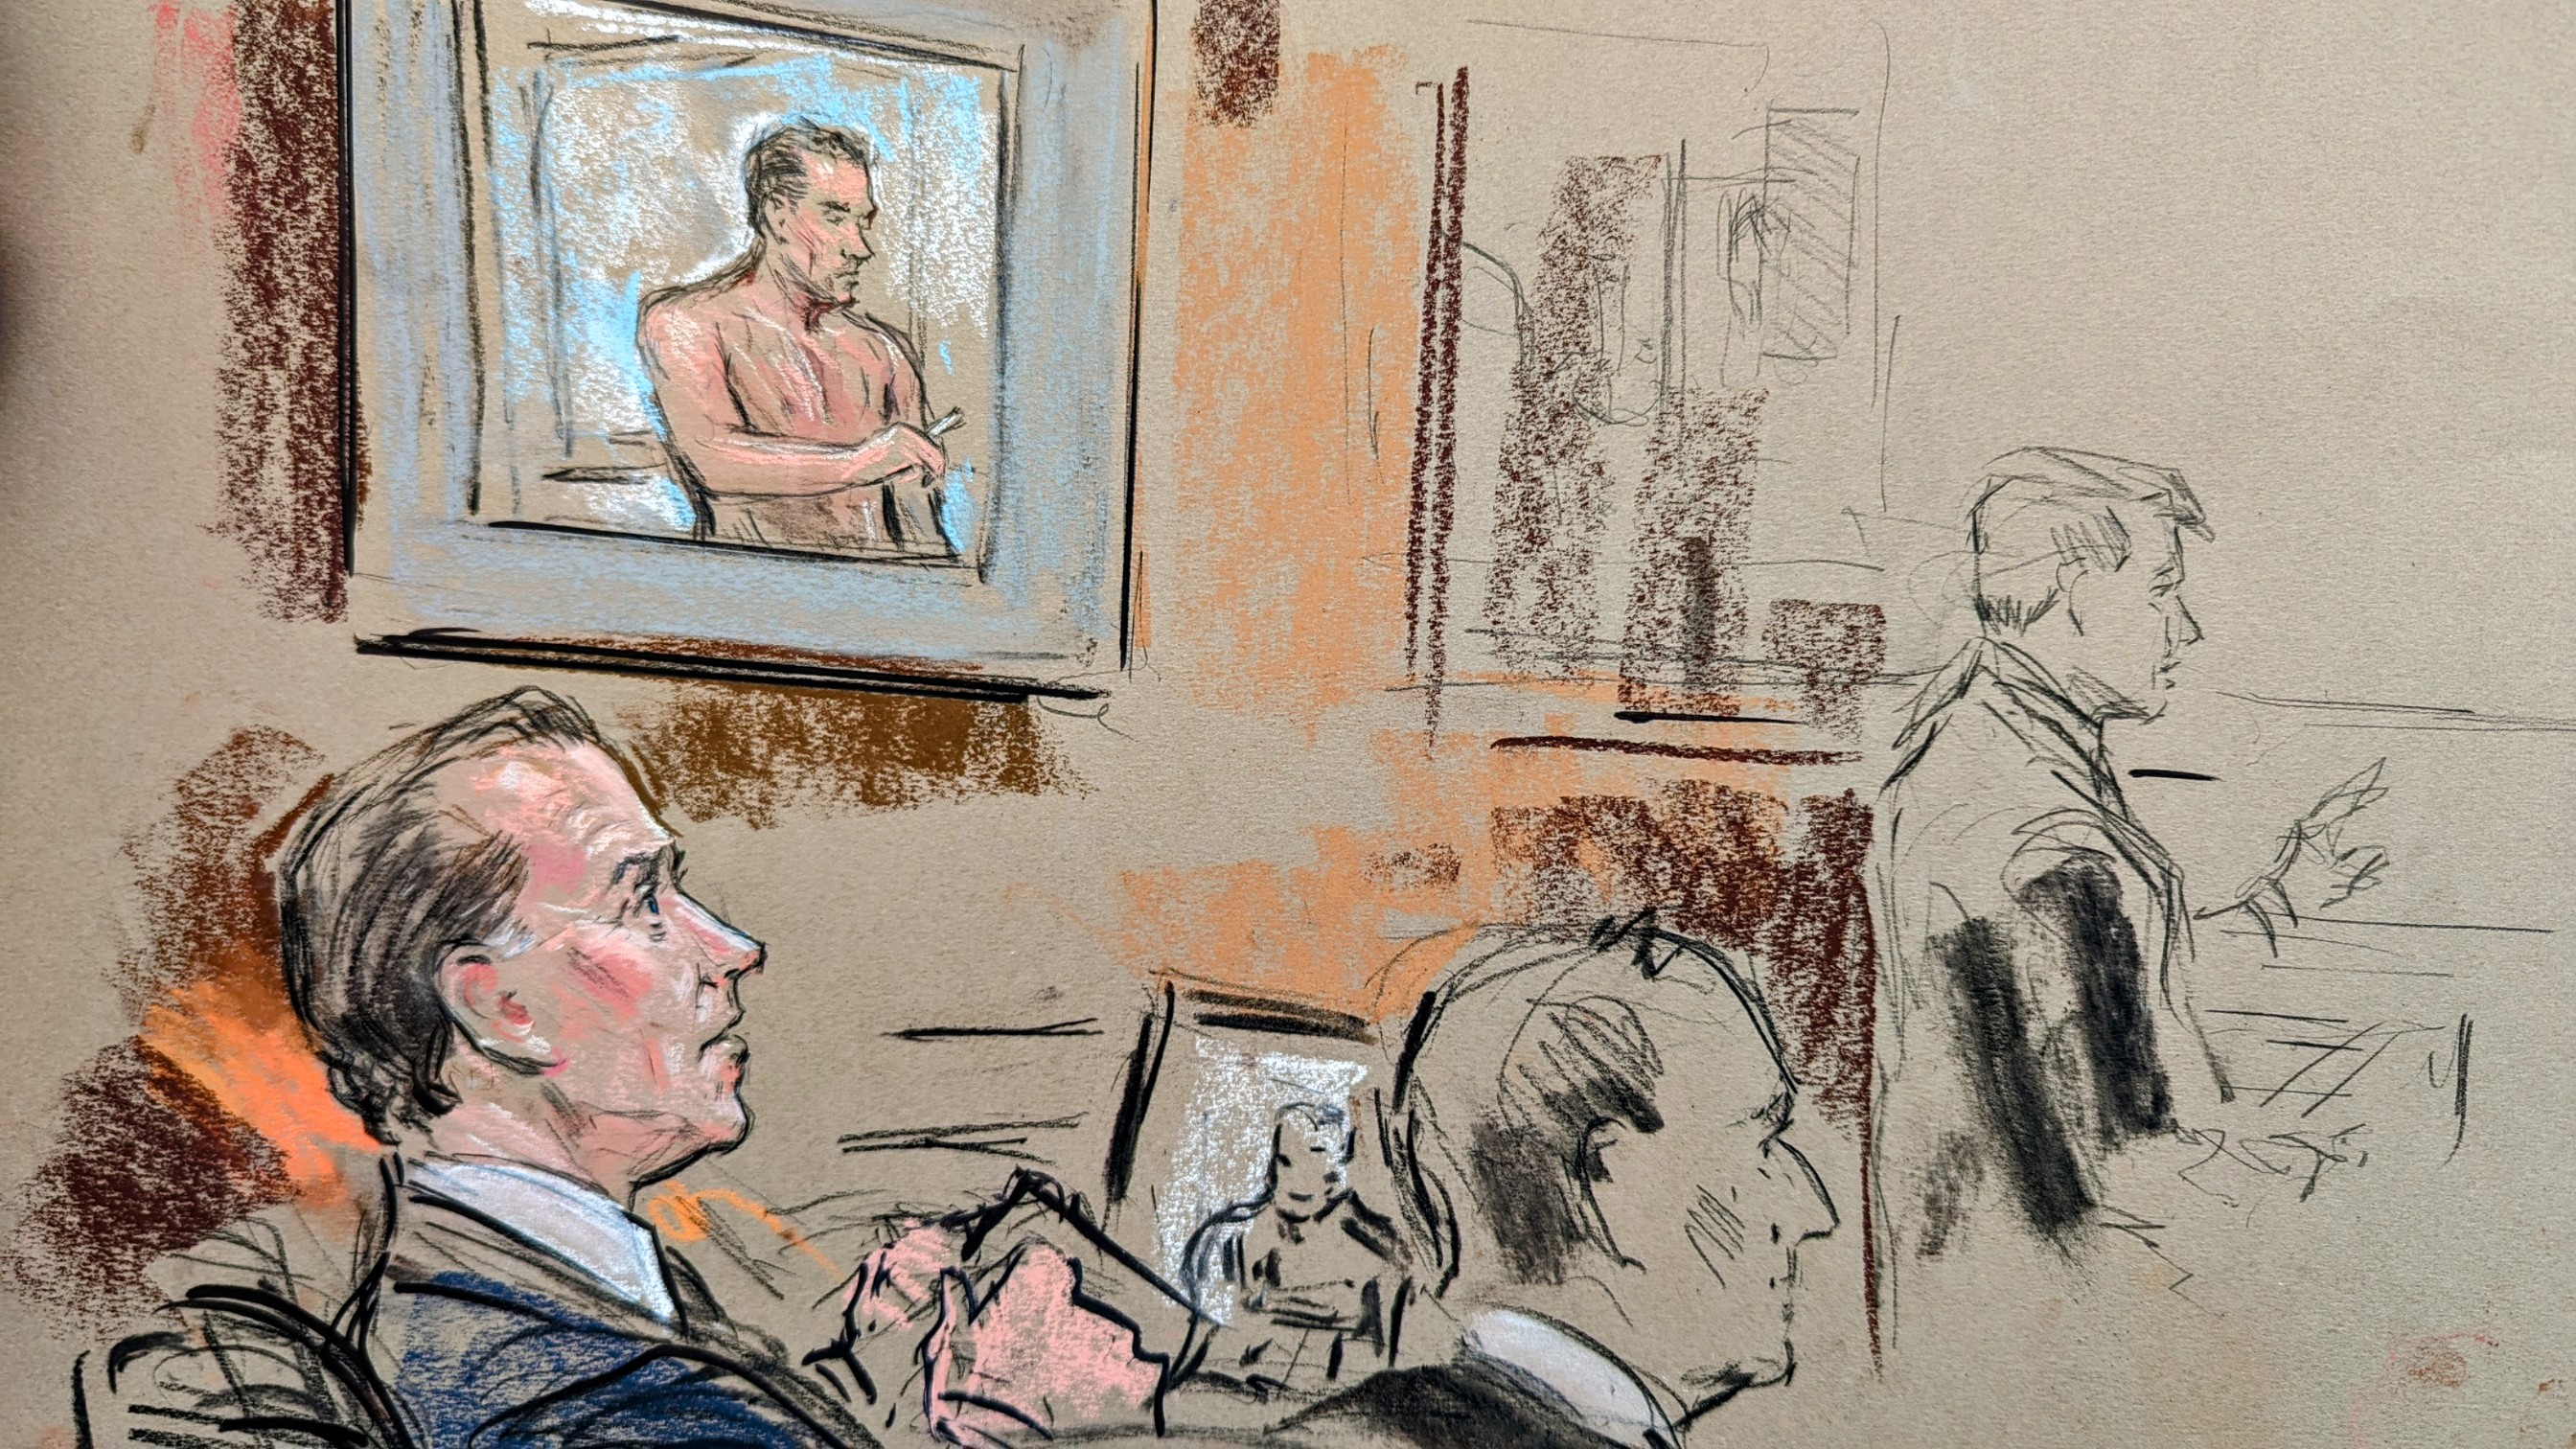 A video of Hunter Biden shirtless is seen on screen during the trial on Tuesday in Wilmington, Delaware.